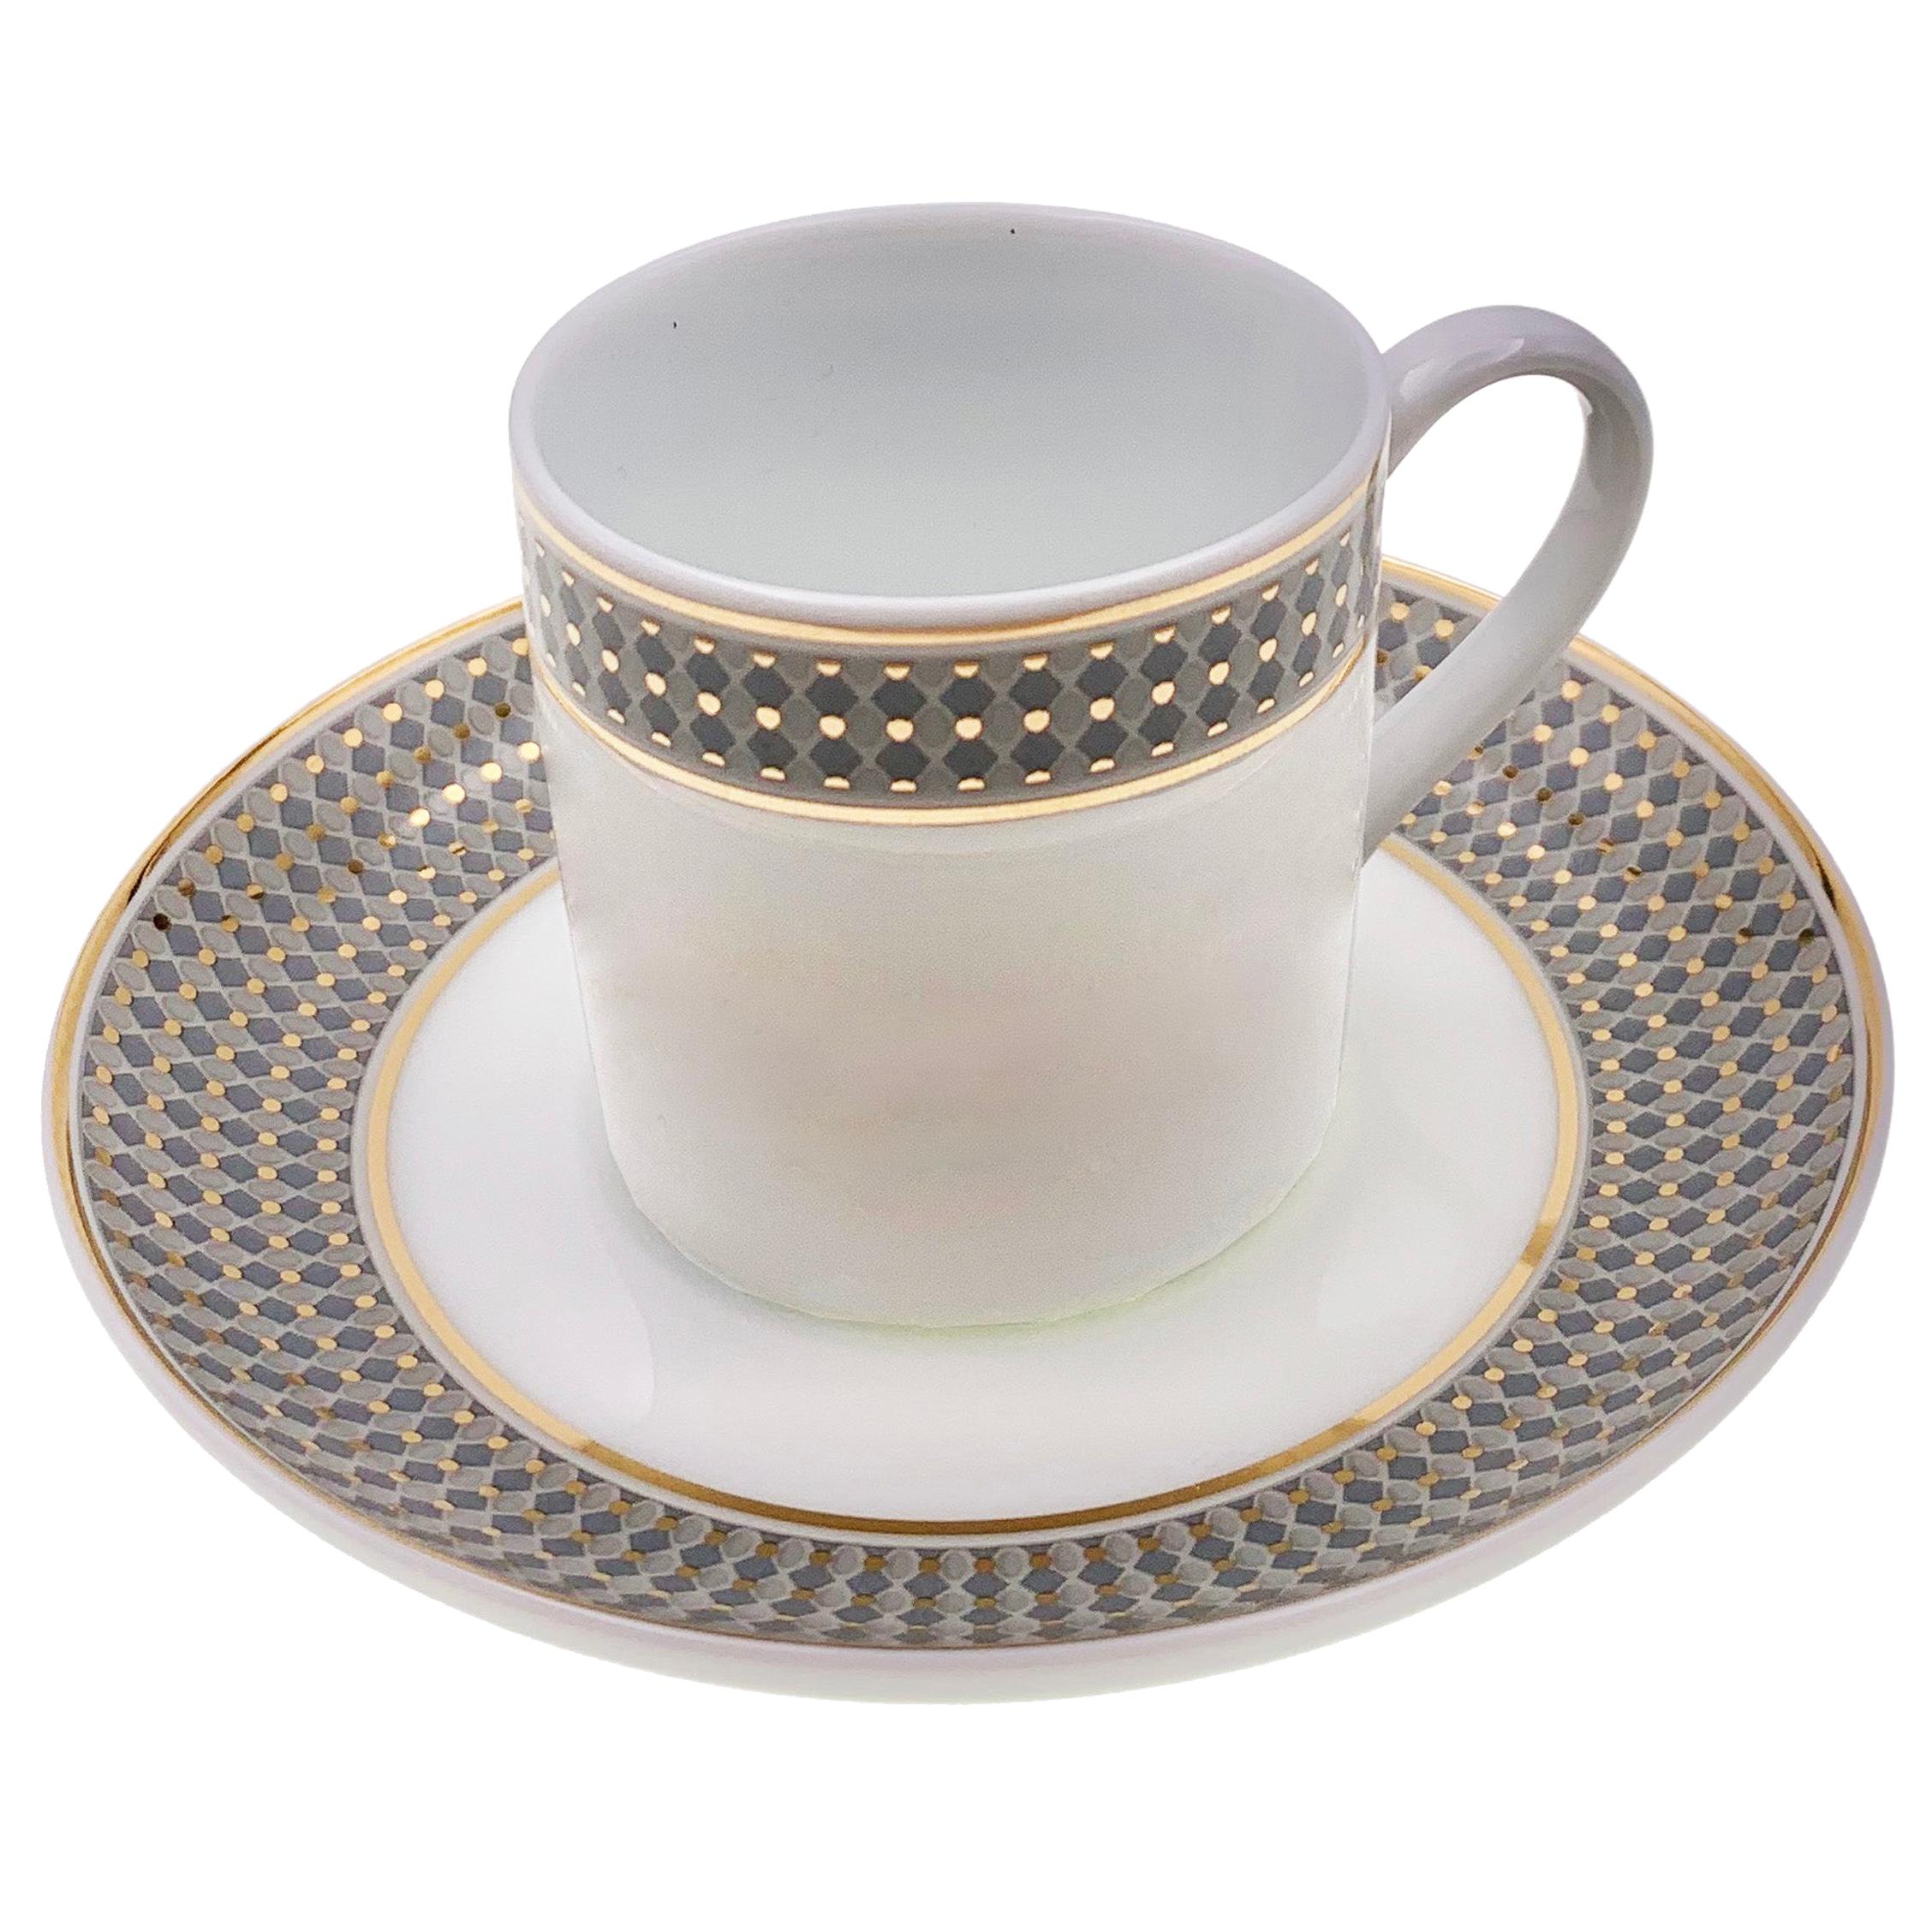 Set of 2 Coffee Cup with Saucer Modern Vintage André Fu Living Tableware New